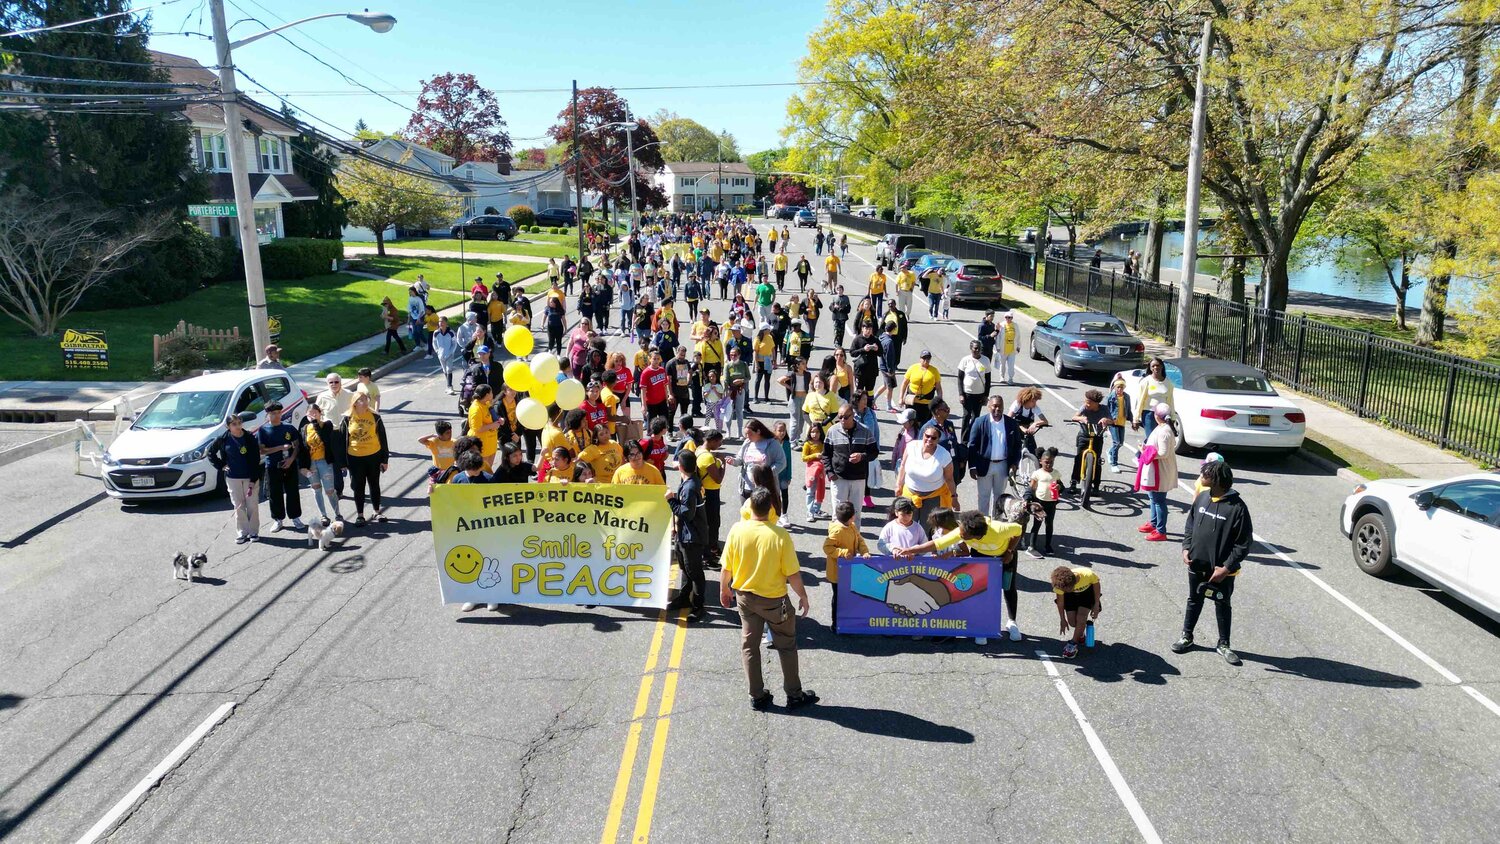 Participants of the Freeport Cares Peace March on May 6 come together in a show of unity and harmony.